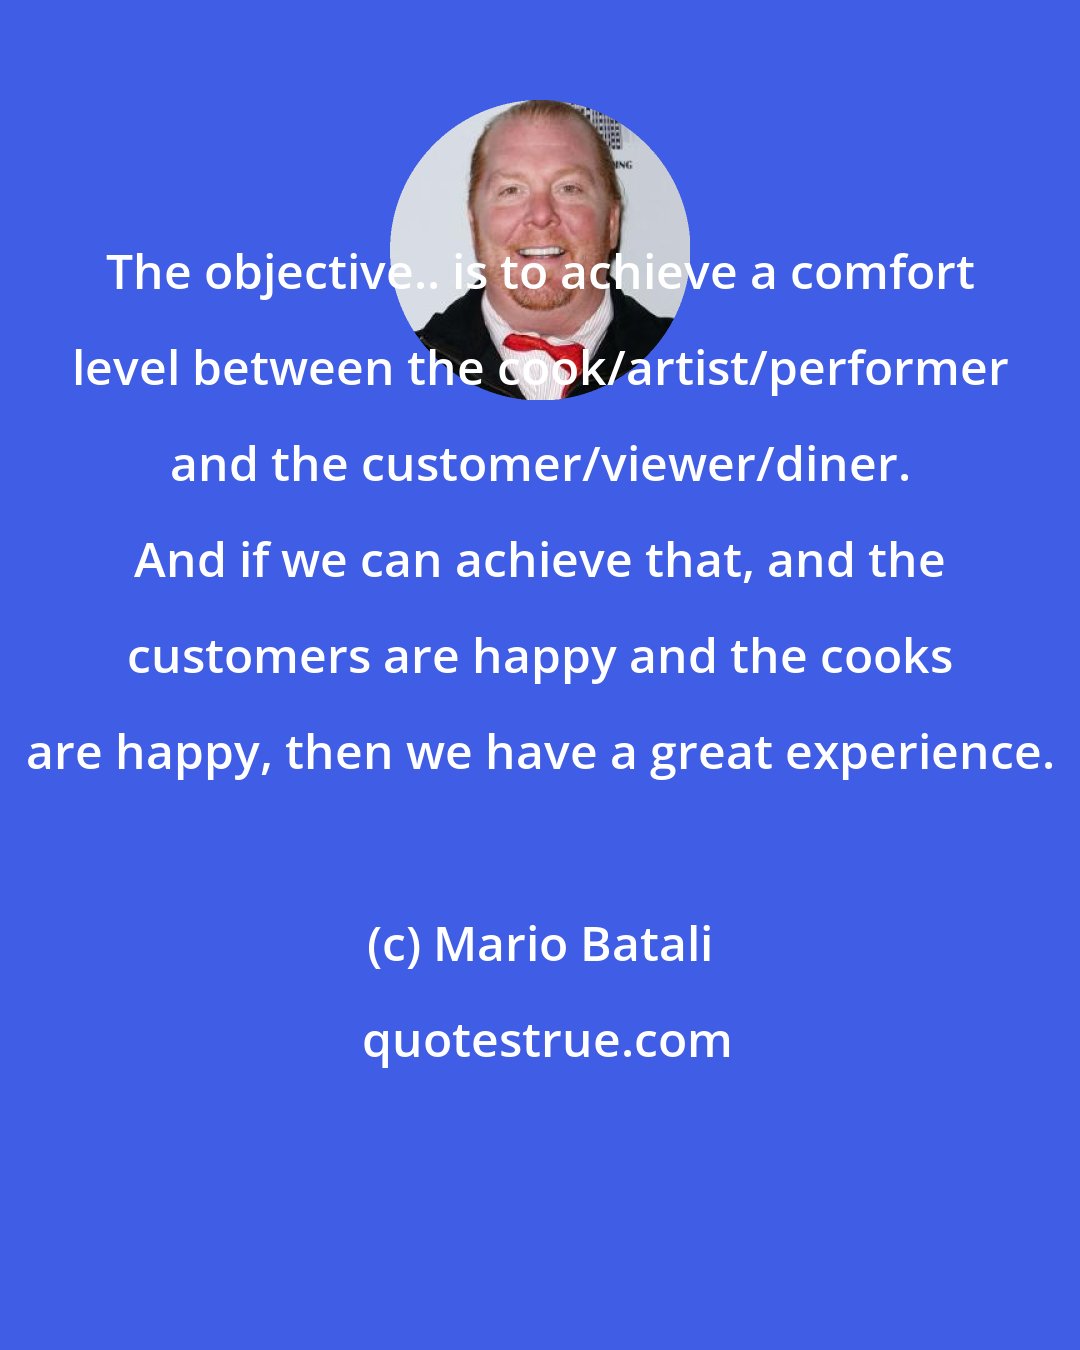 Mario Batali: The objective.. is to achieve a comfort level between the cook/artist/performer and the customer/viewer/diner. And if we can achieve that, and the customers are happy and the cooks are happy, then we have a great experience.